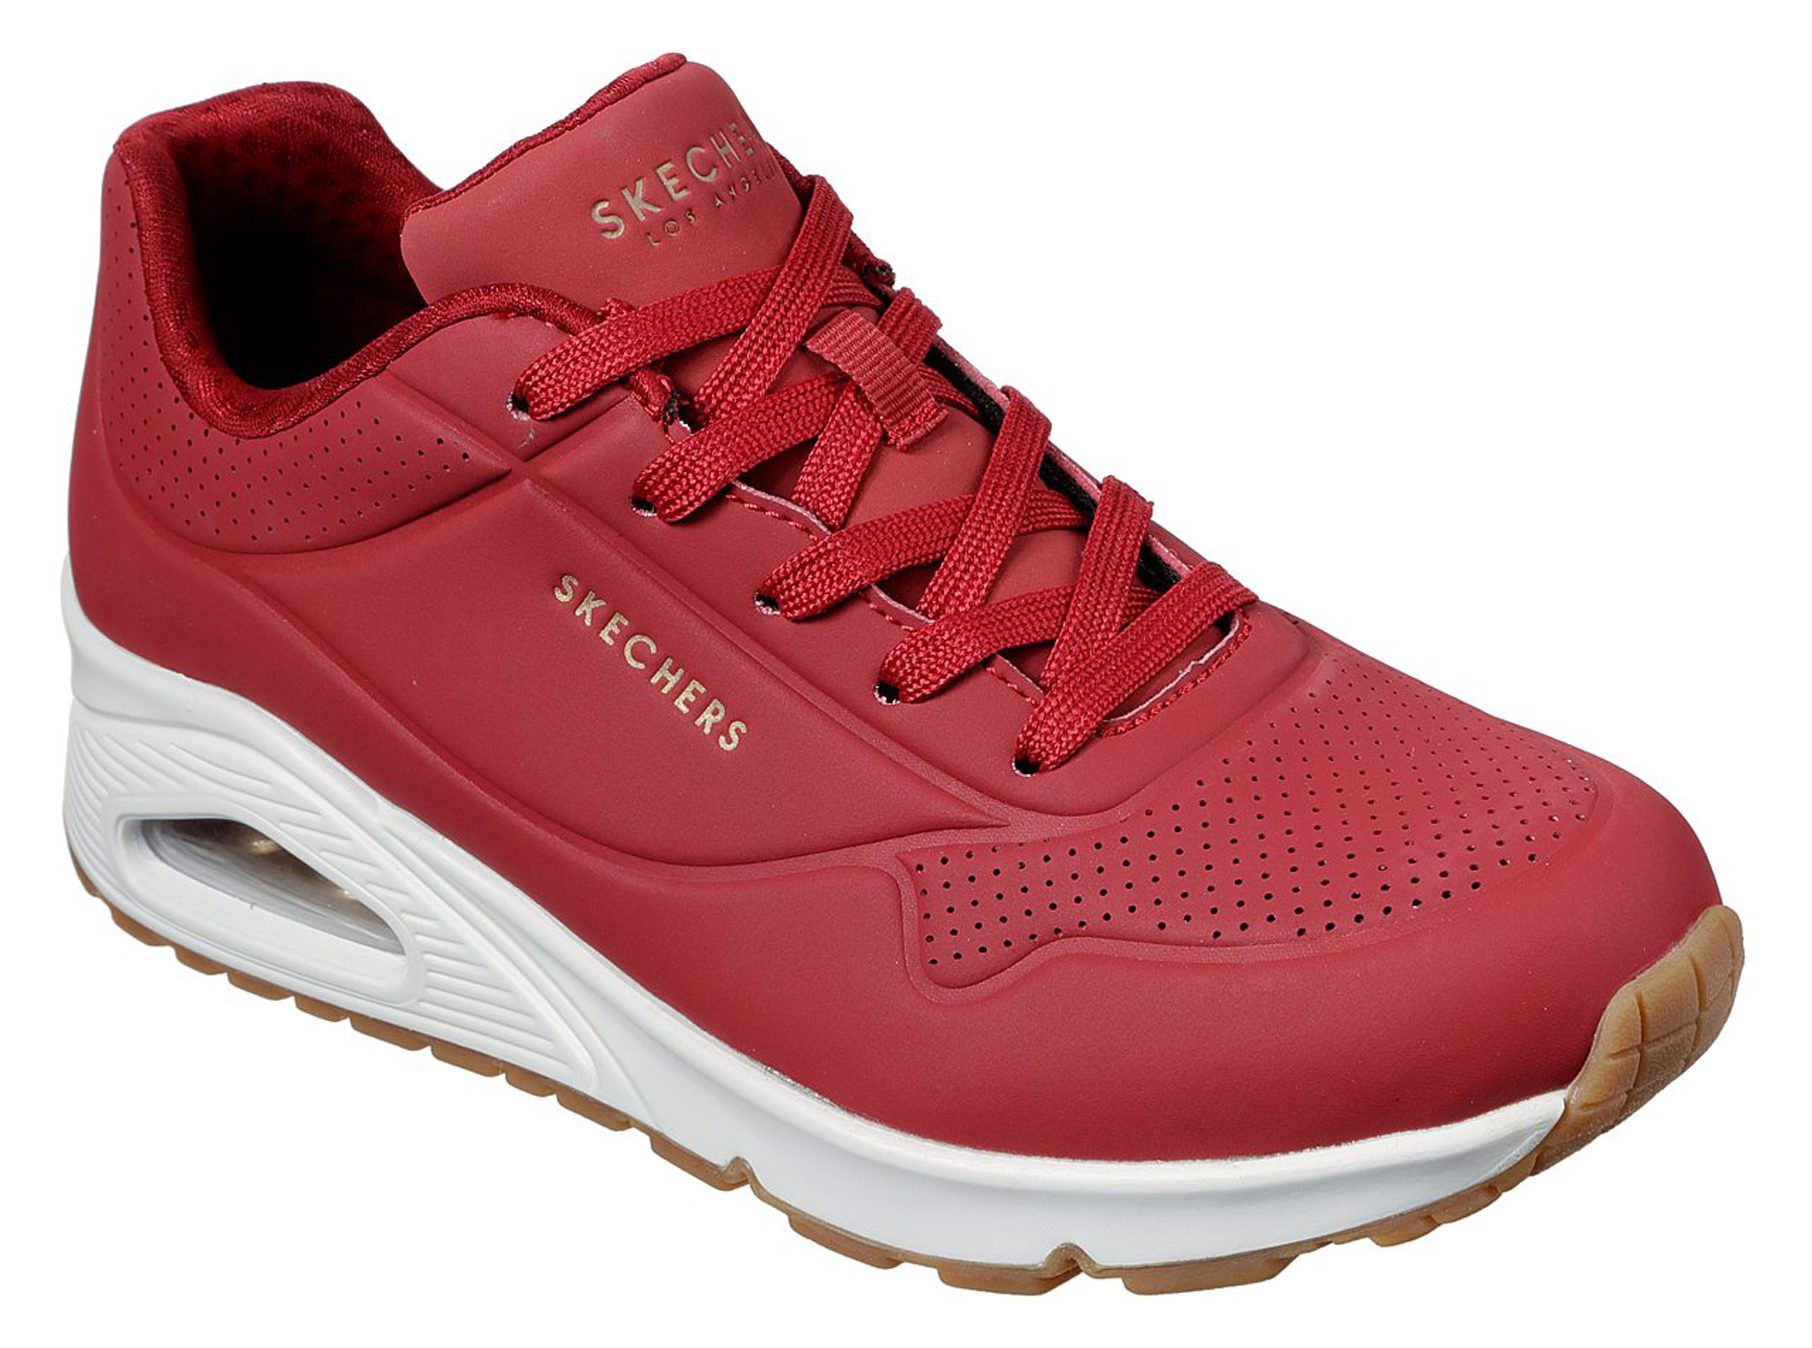 Skechers Uno - Stand on Air Dark Red 73690 DKRD - Womens Trainers ...